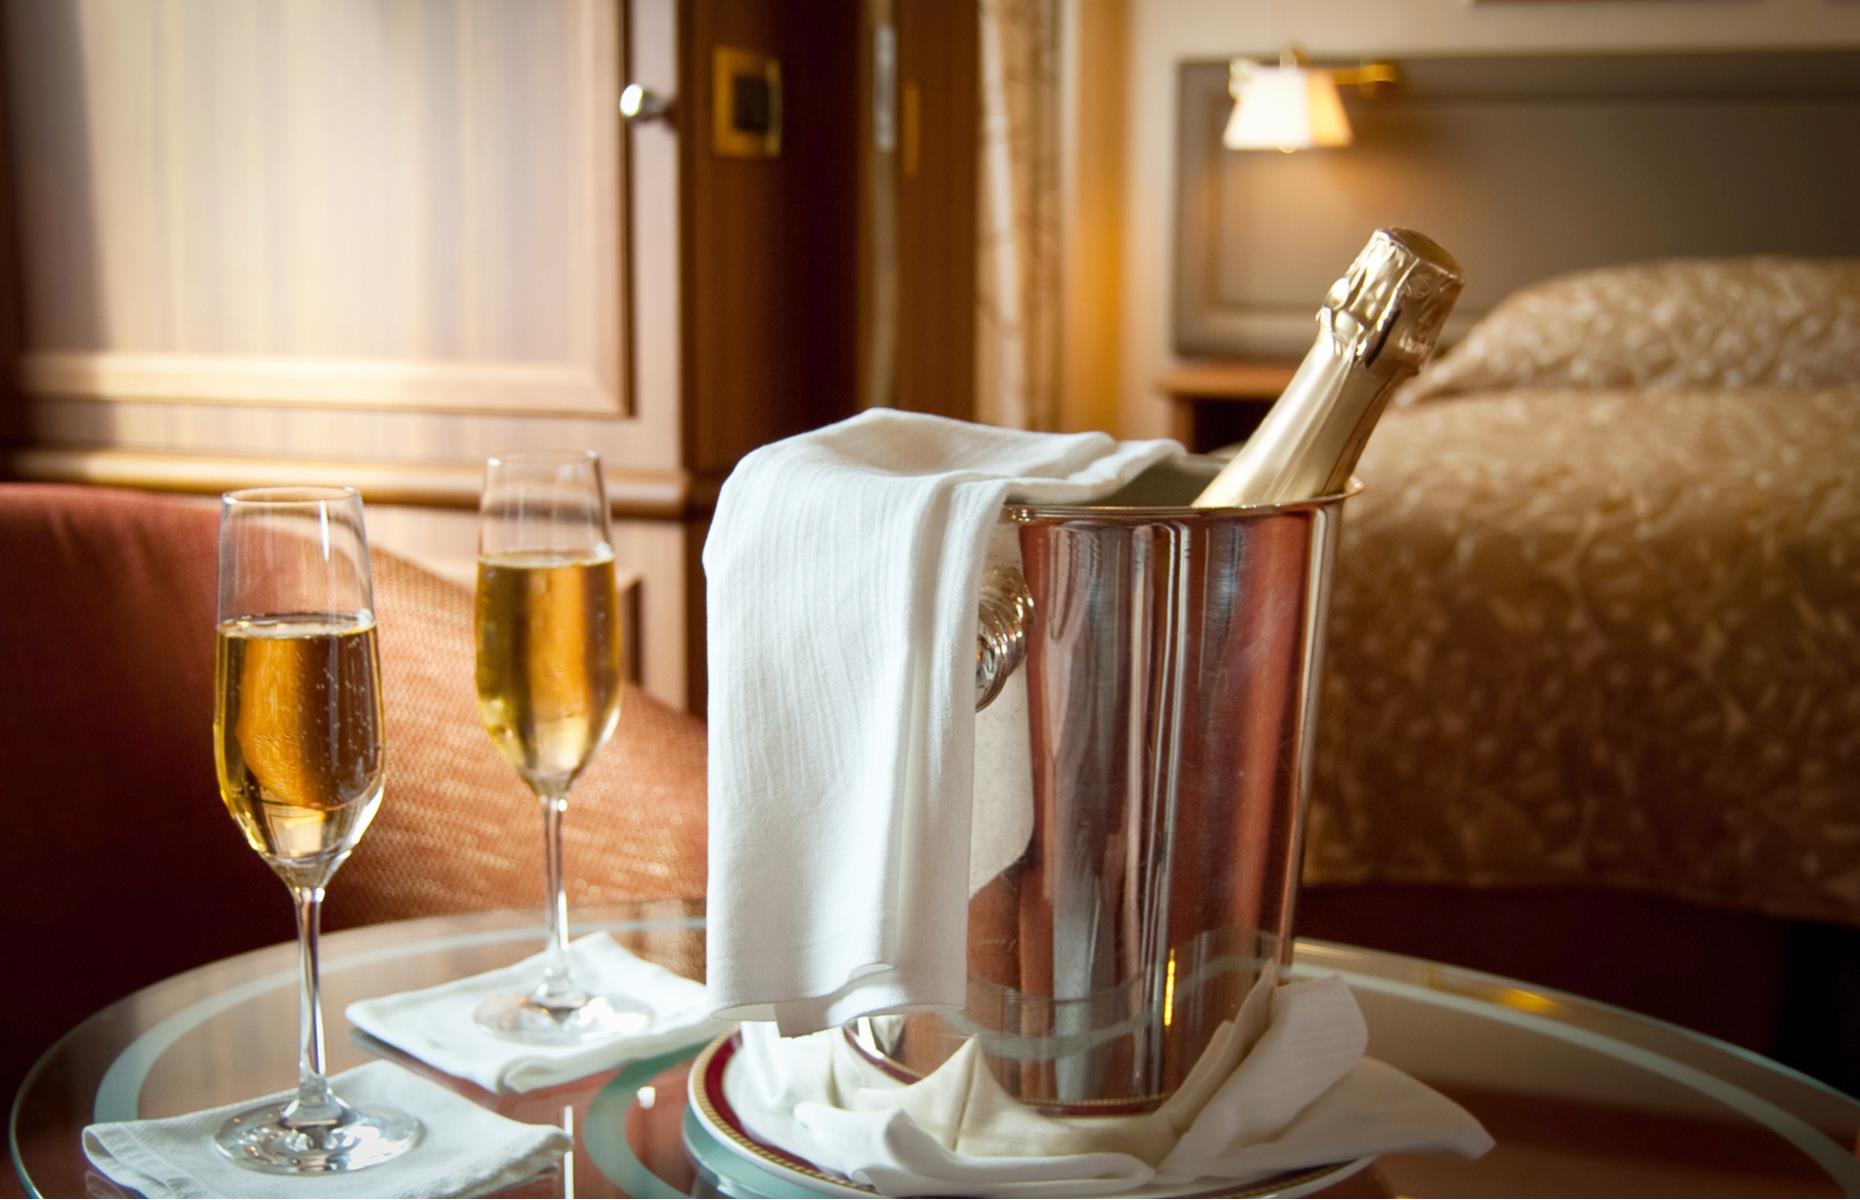 <p>As much as you may get attached to the Champagne flutes, cups or nice wine glasses in your hotel room (or on the plane), you can’t pop them in your bag to take home. These are things that you will definitely get fined or charged for.</p>